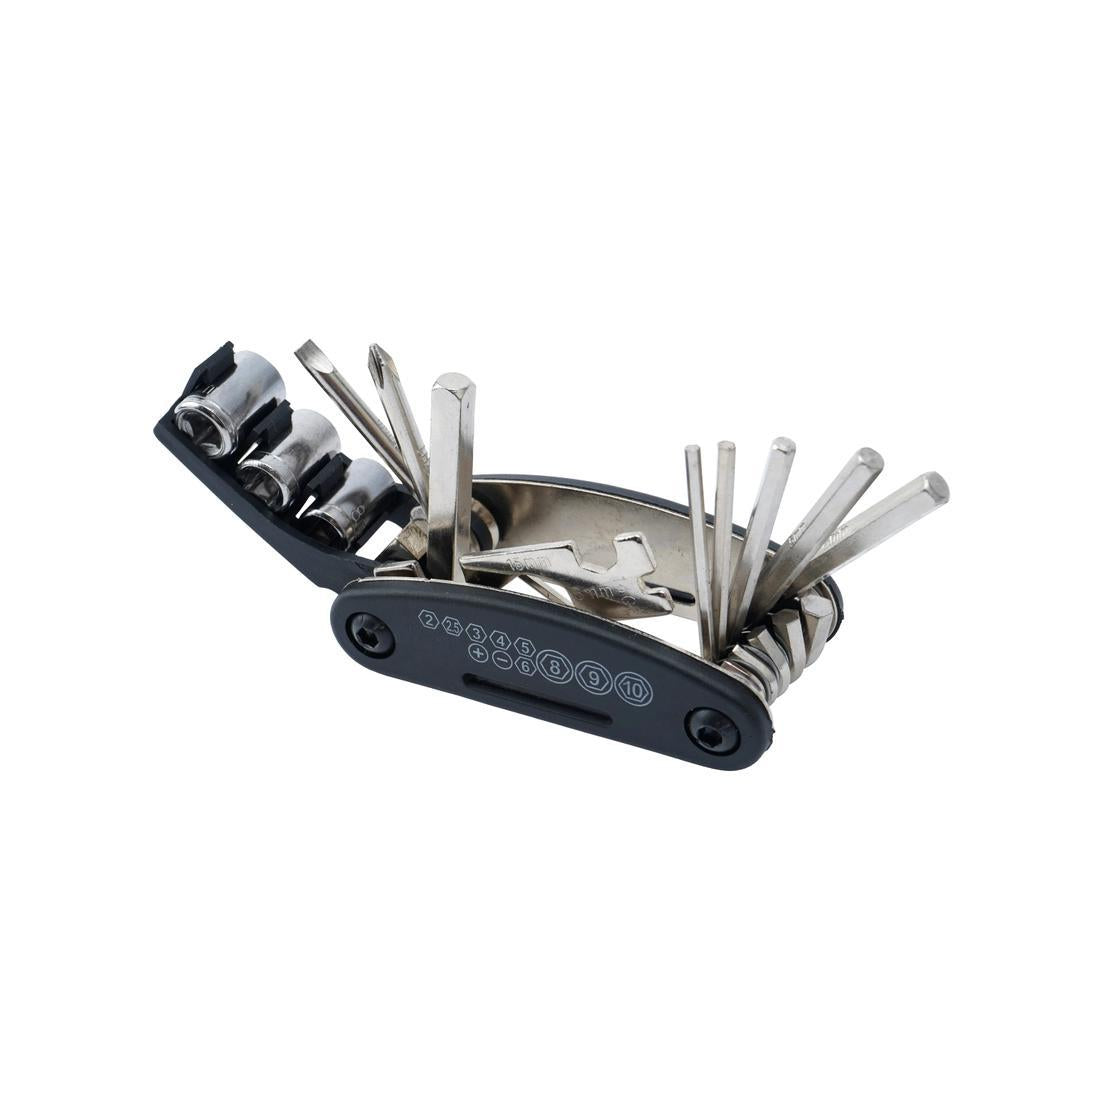 Wild and Free 15-In-1 Bike Multitool